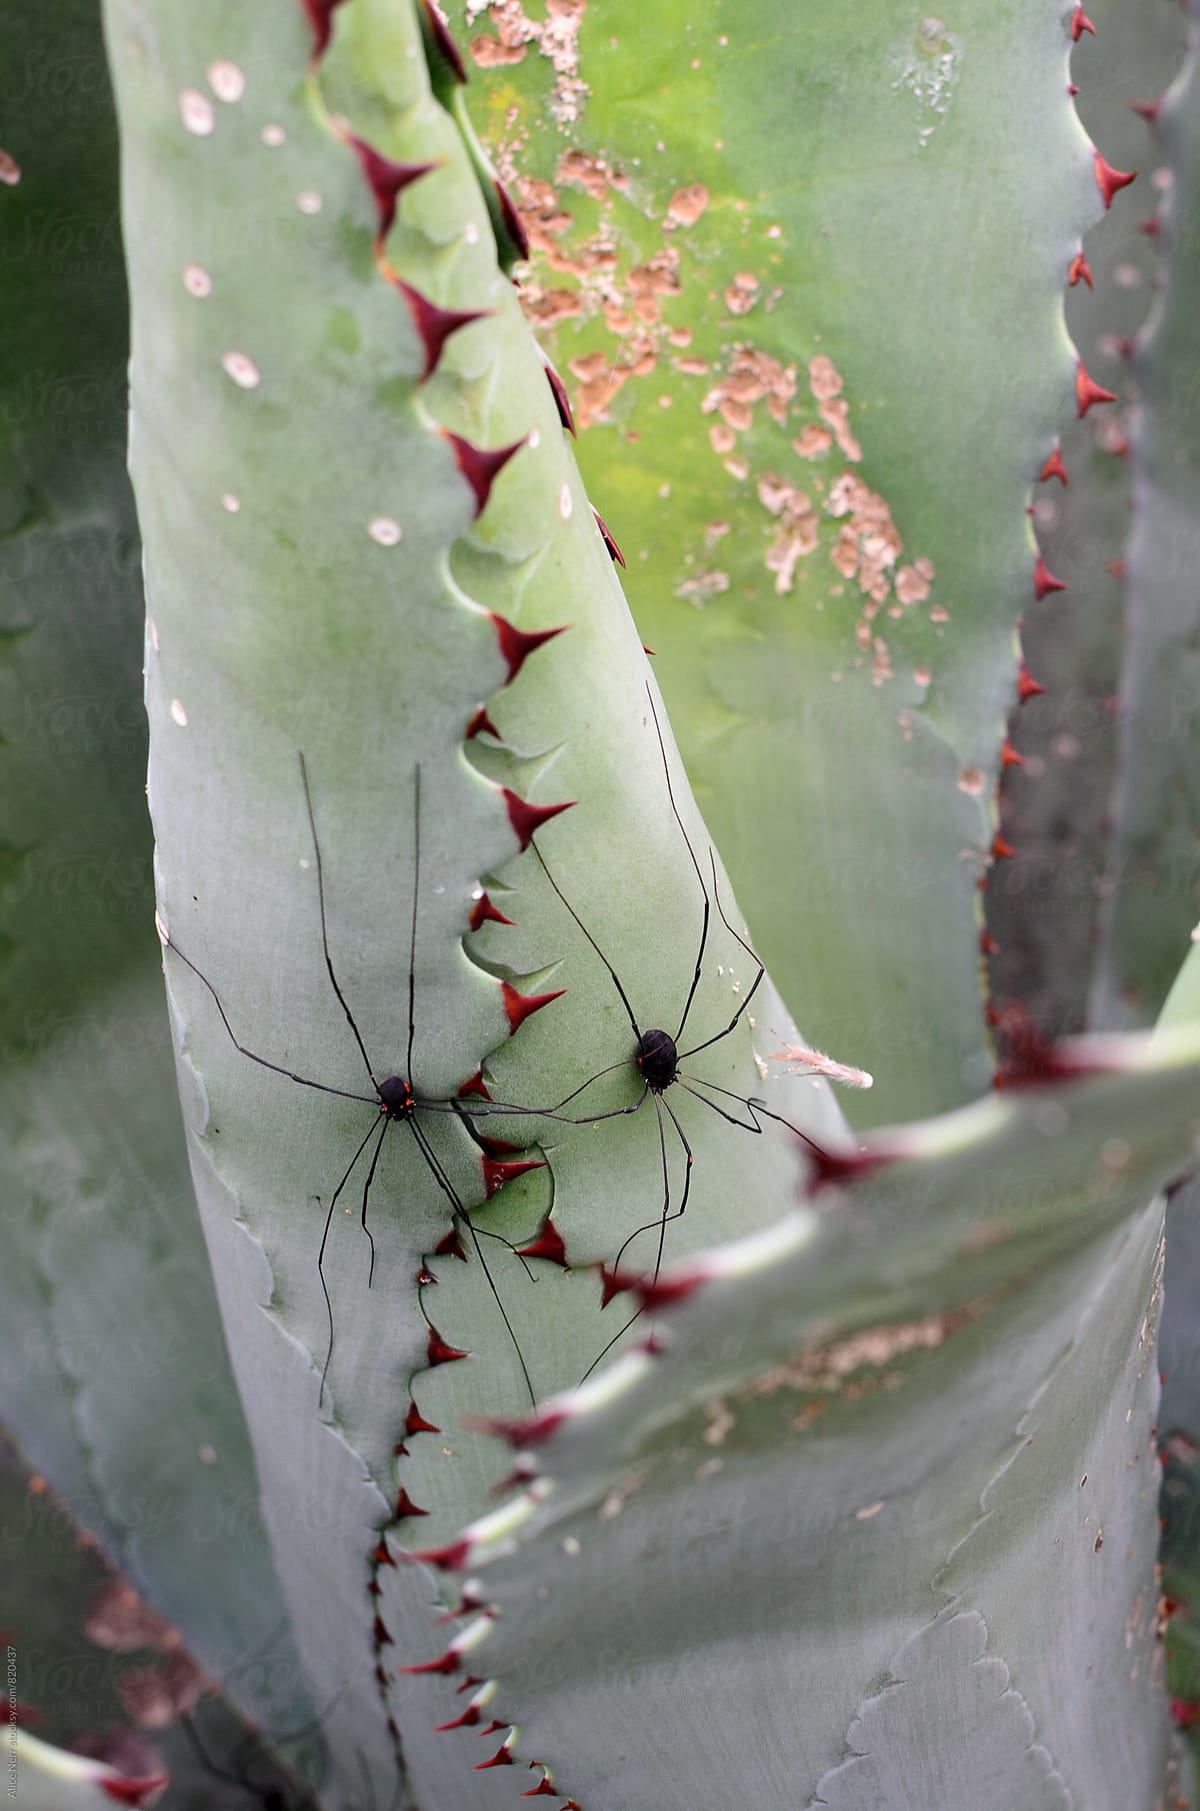 Two black spiders with red dots and very long legs in between agave leaves